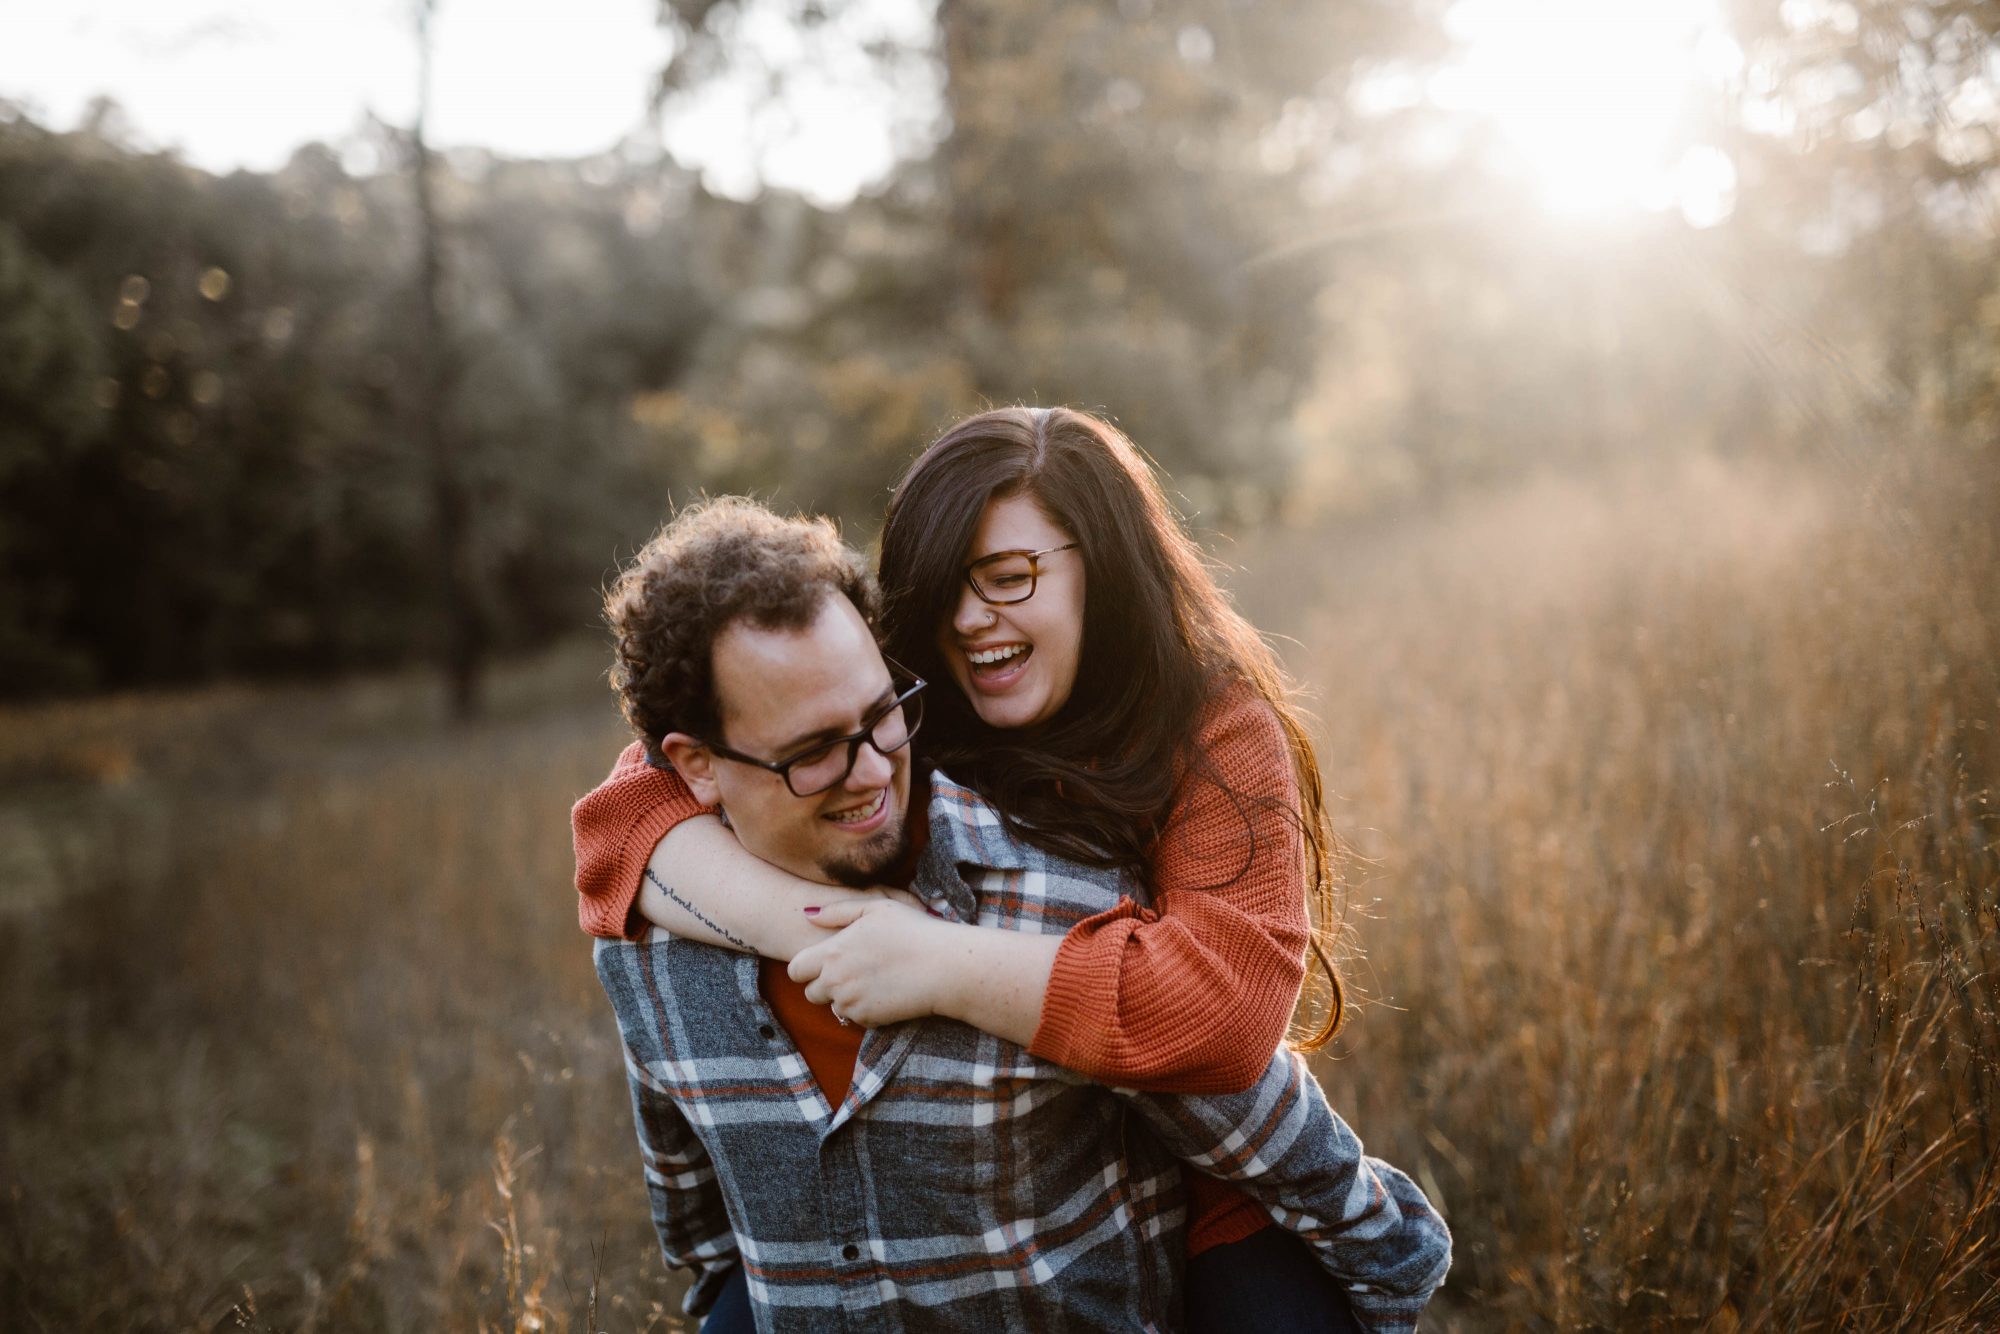 What Photographers Want You To Know About Engagement Photos